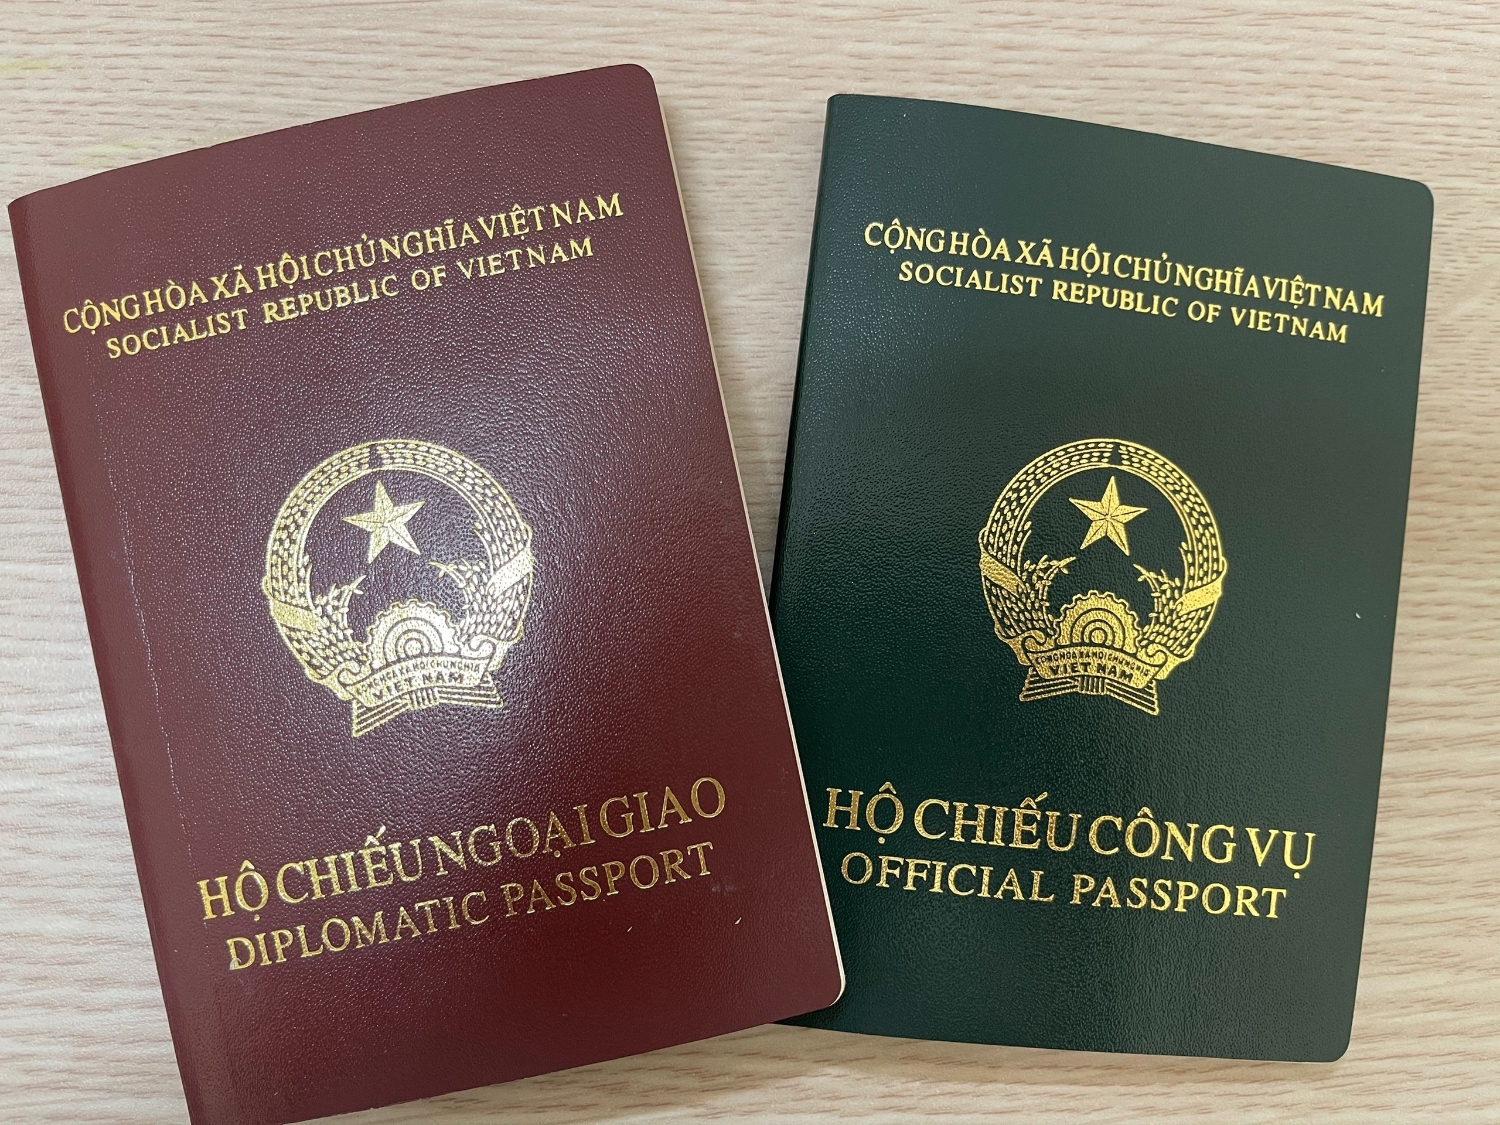 Procedures for issuing diplomatic passports, and service passports (without electronic chips) at domestic offices of the Ministry of Foreign Affairs of Vietnam